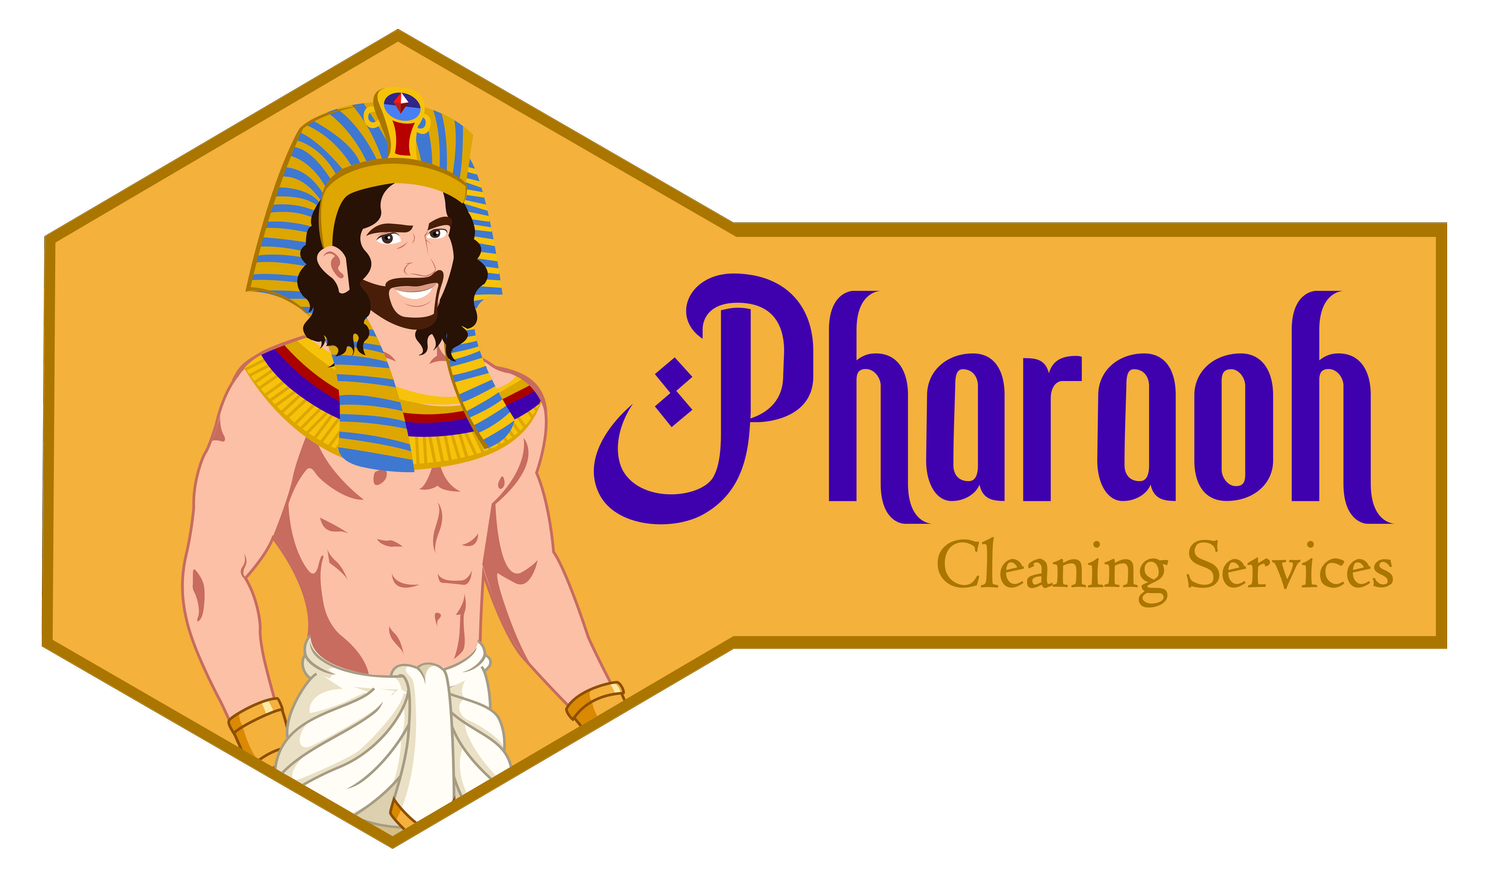 Pharoah Cleaning Services